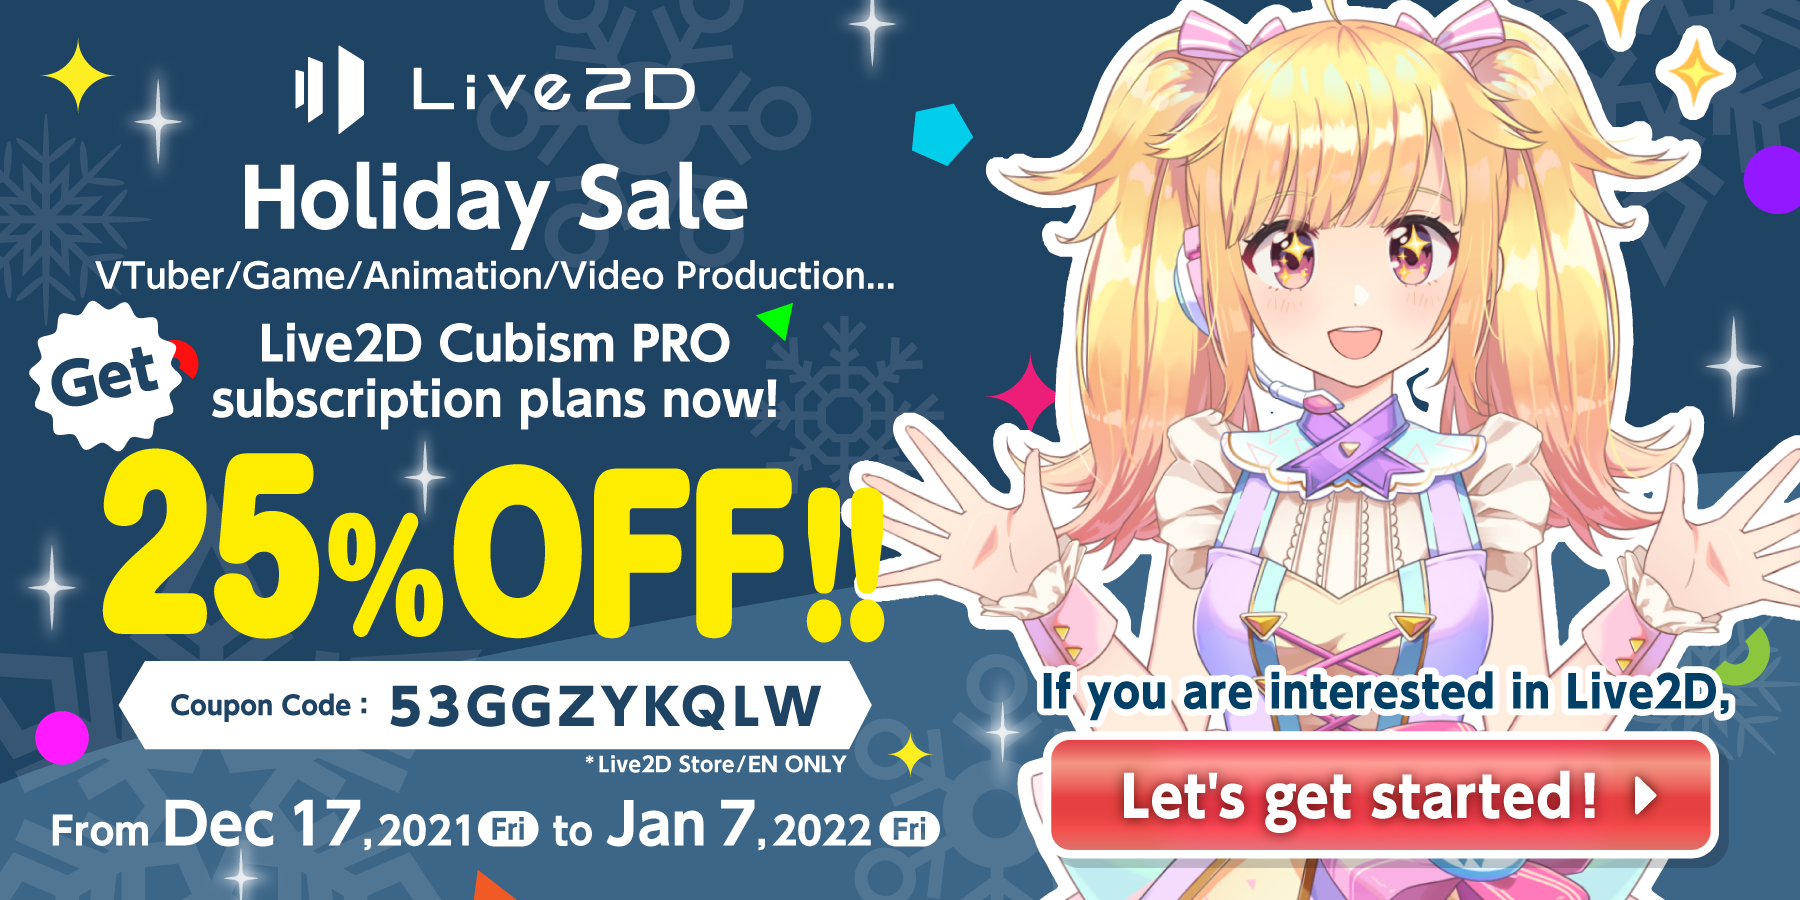 Live2D Holiday Sale